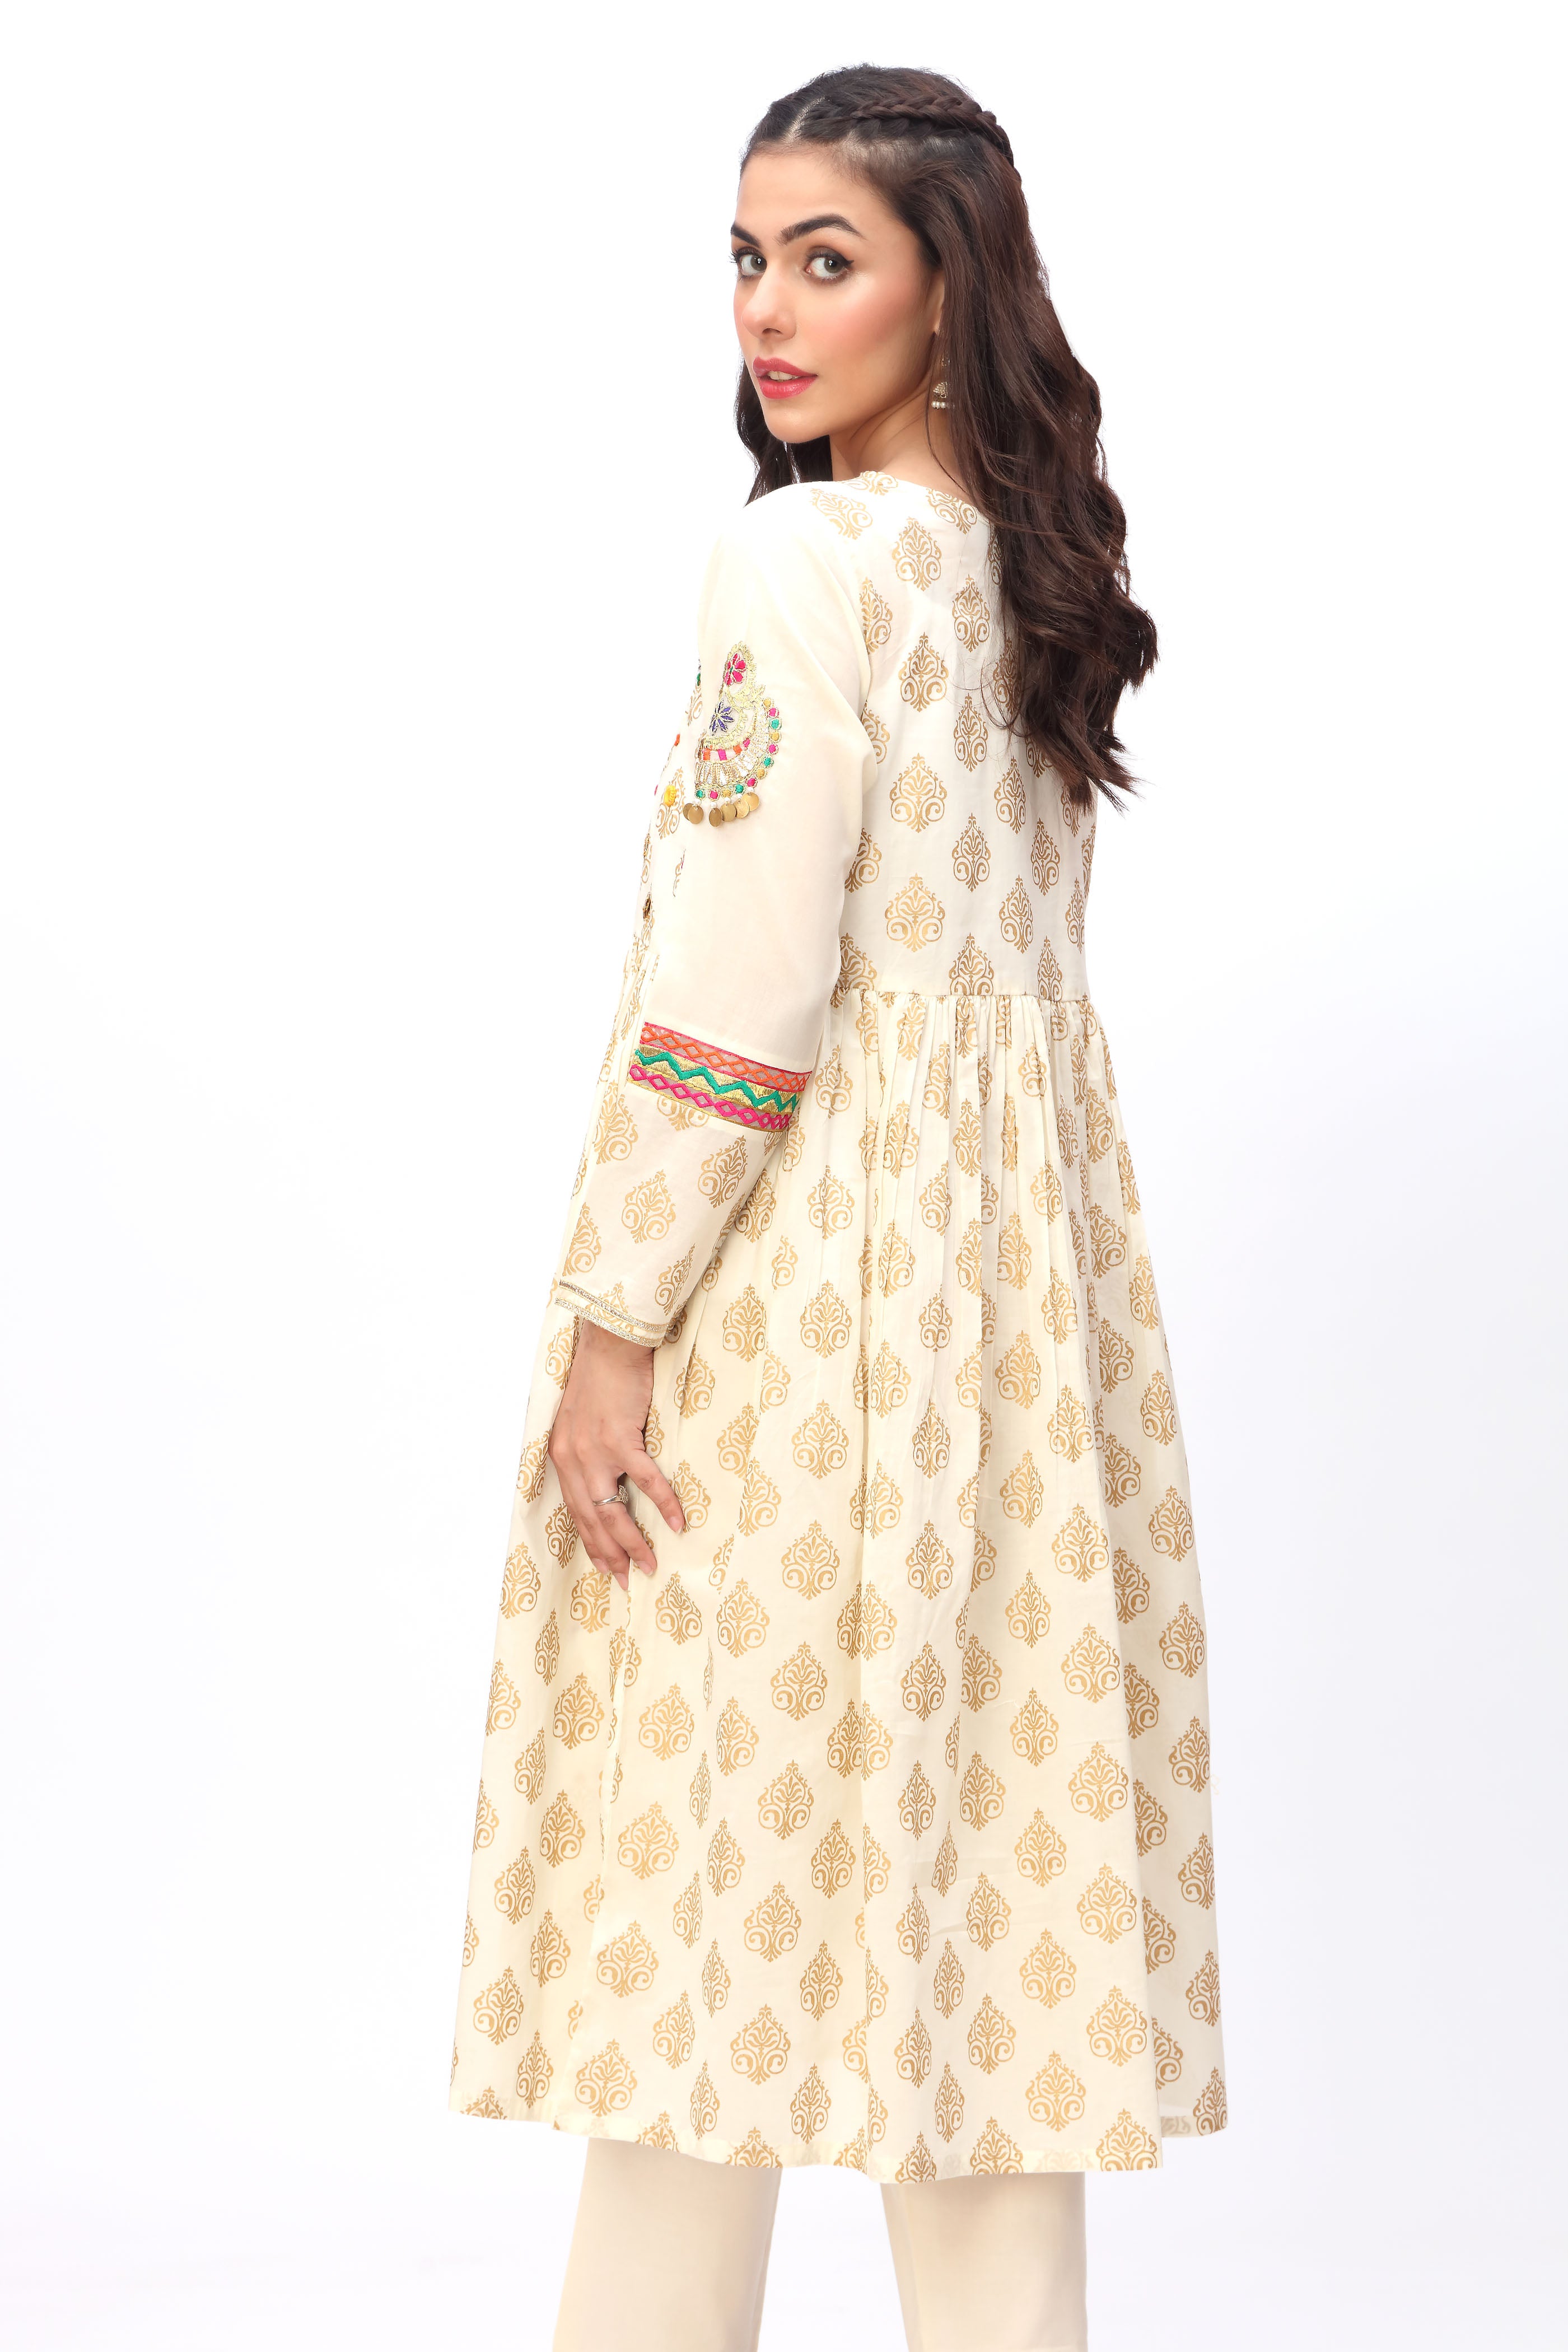 Gold Grid 1 in Off White coloured Printed Lawn fabric 3